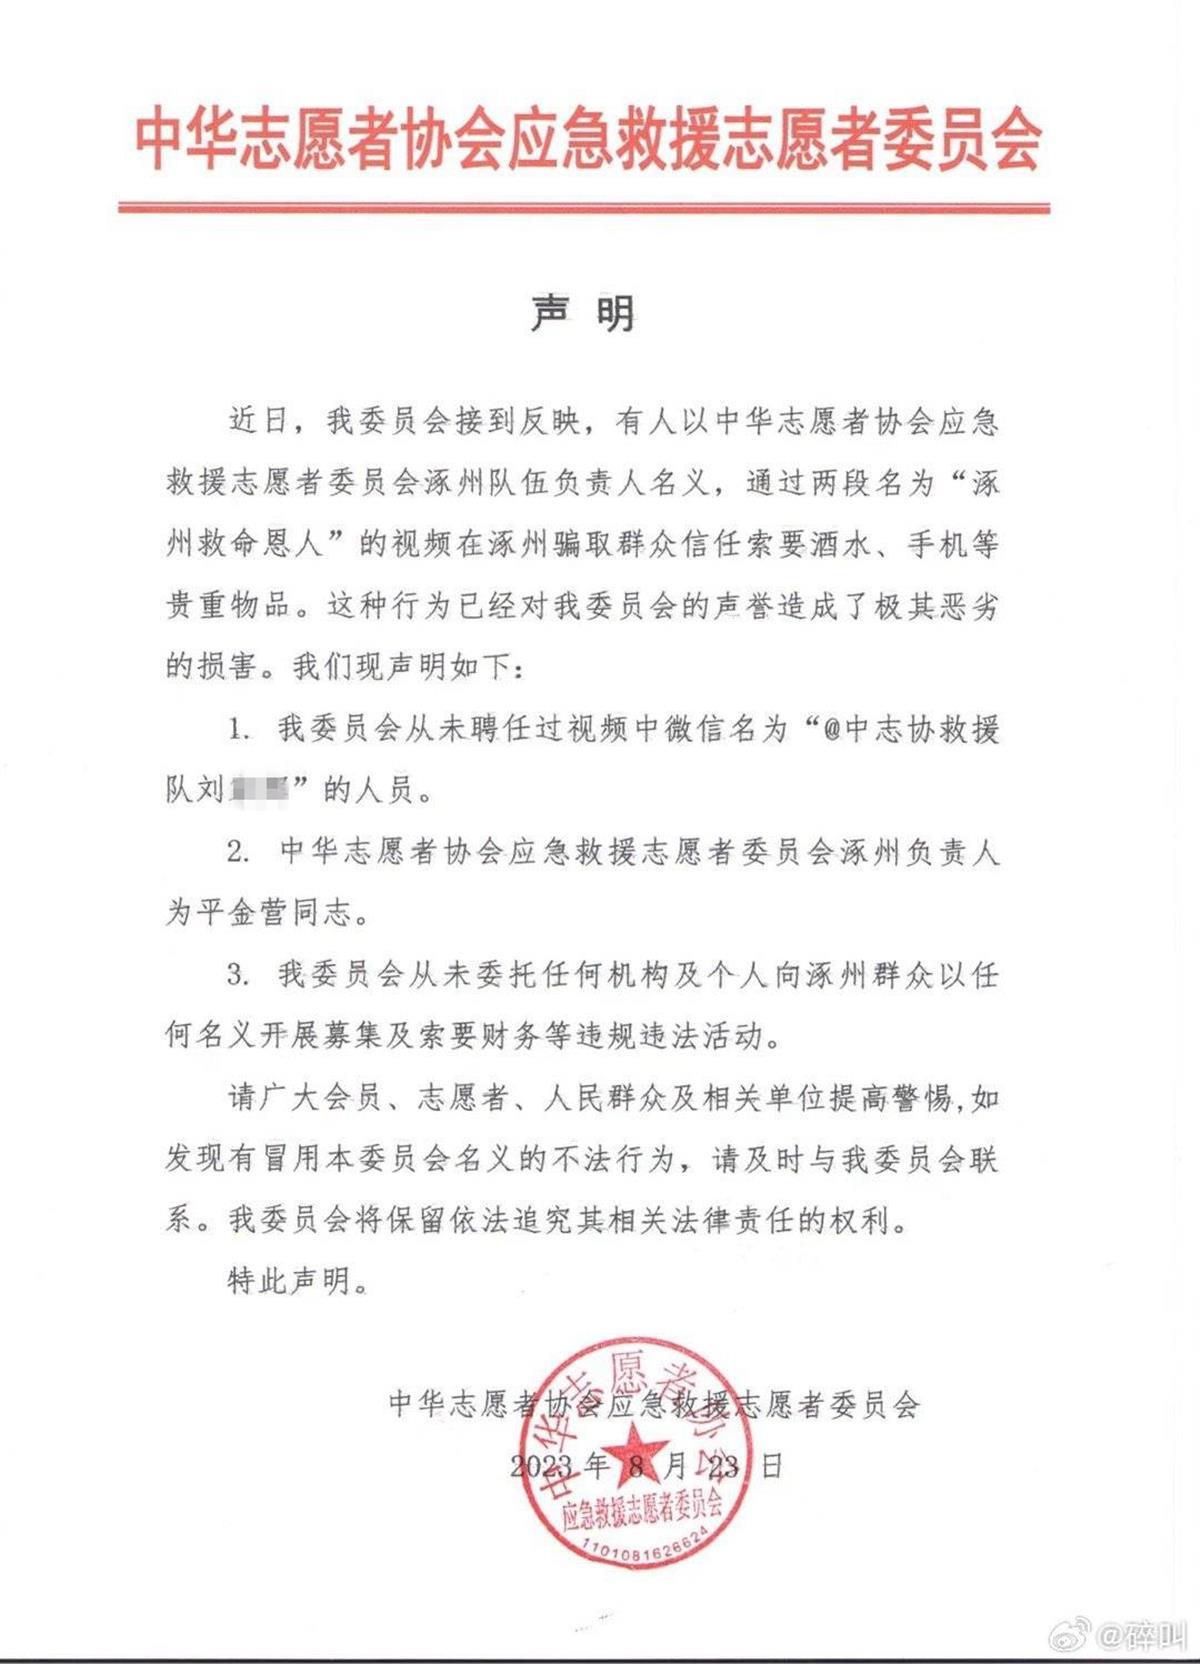 Zhongzhi Association: Counterfeit goods!, He also requested supplies from others, and the "rescue team leader" claimed to have saved 86 people in Zhuozhou